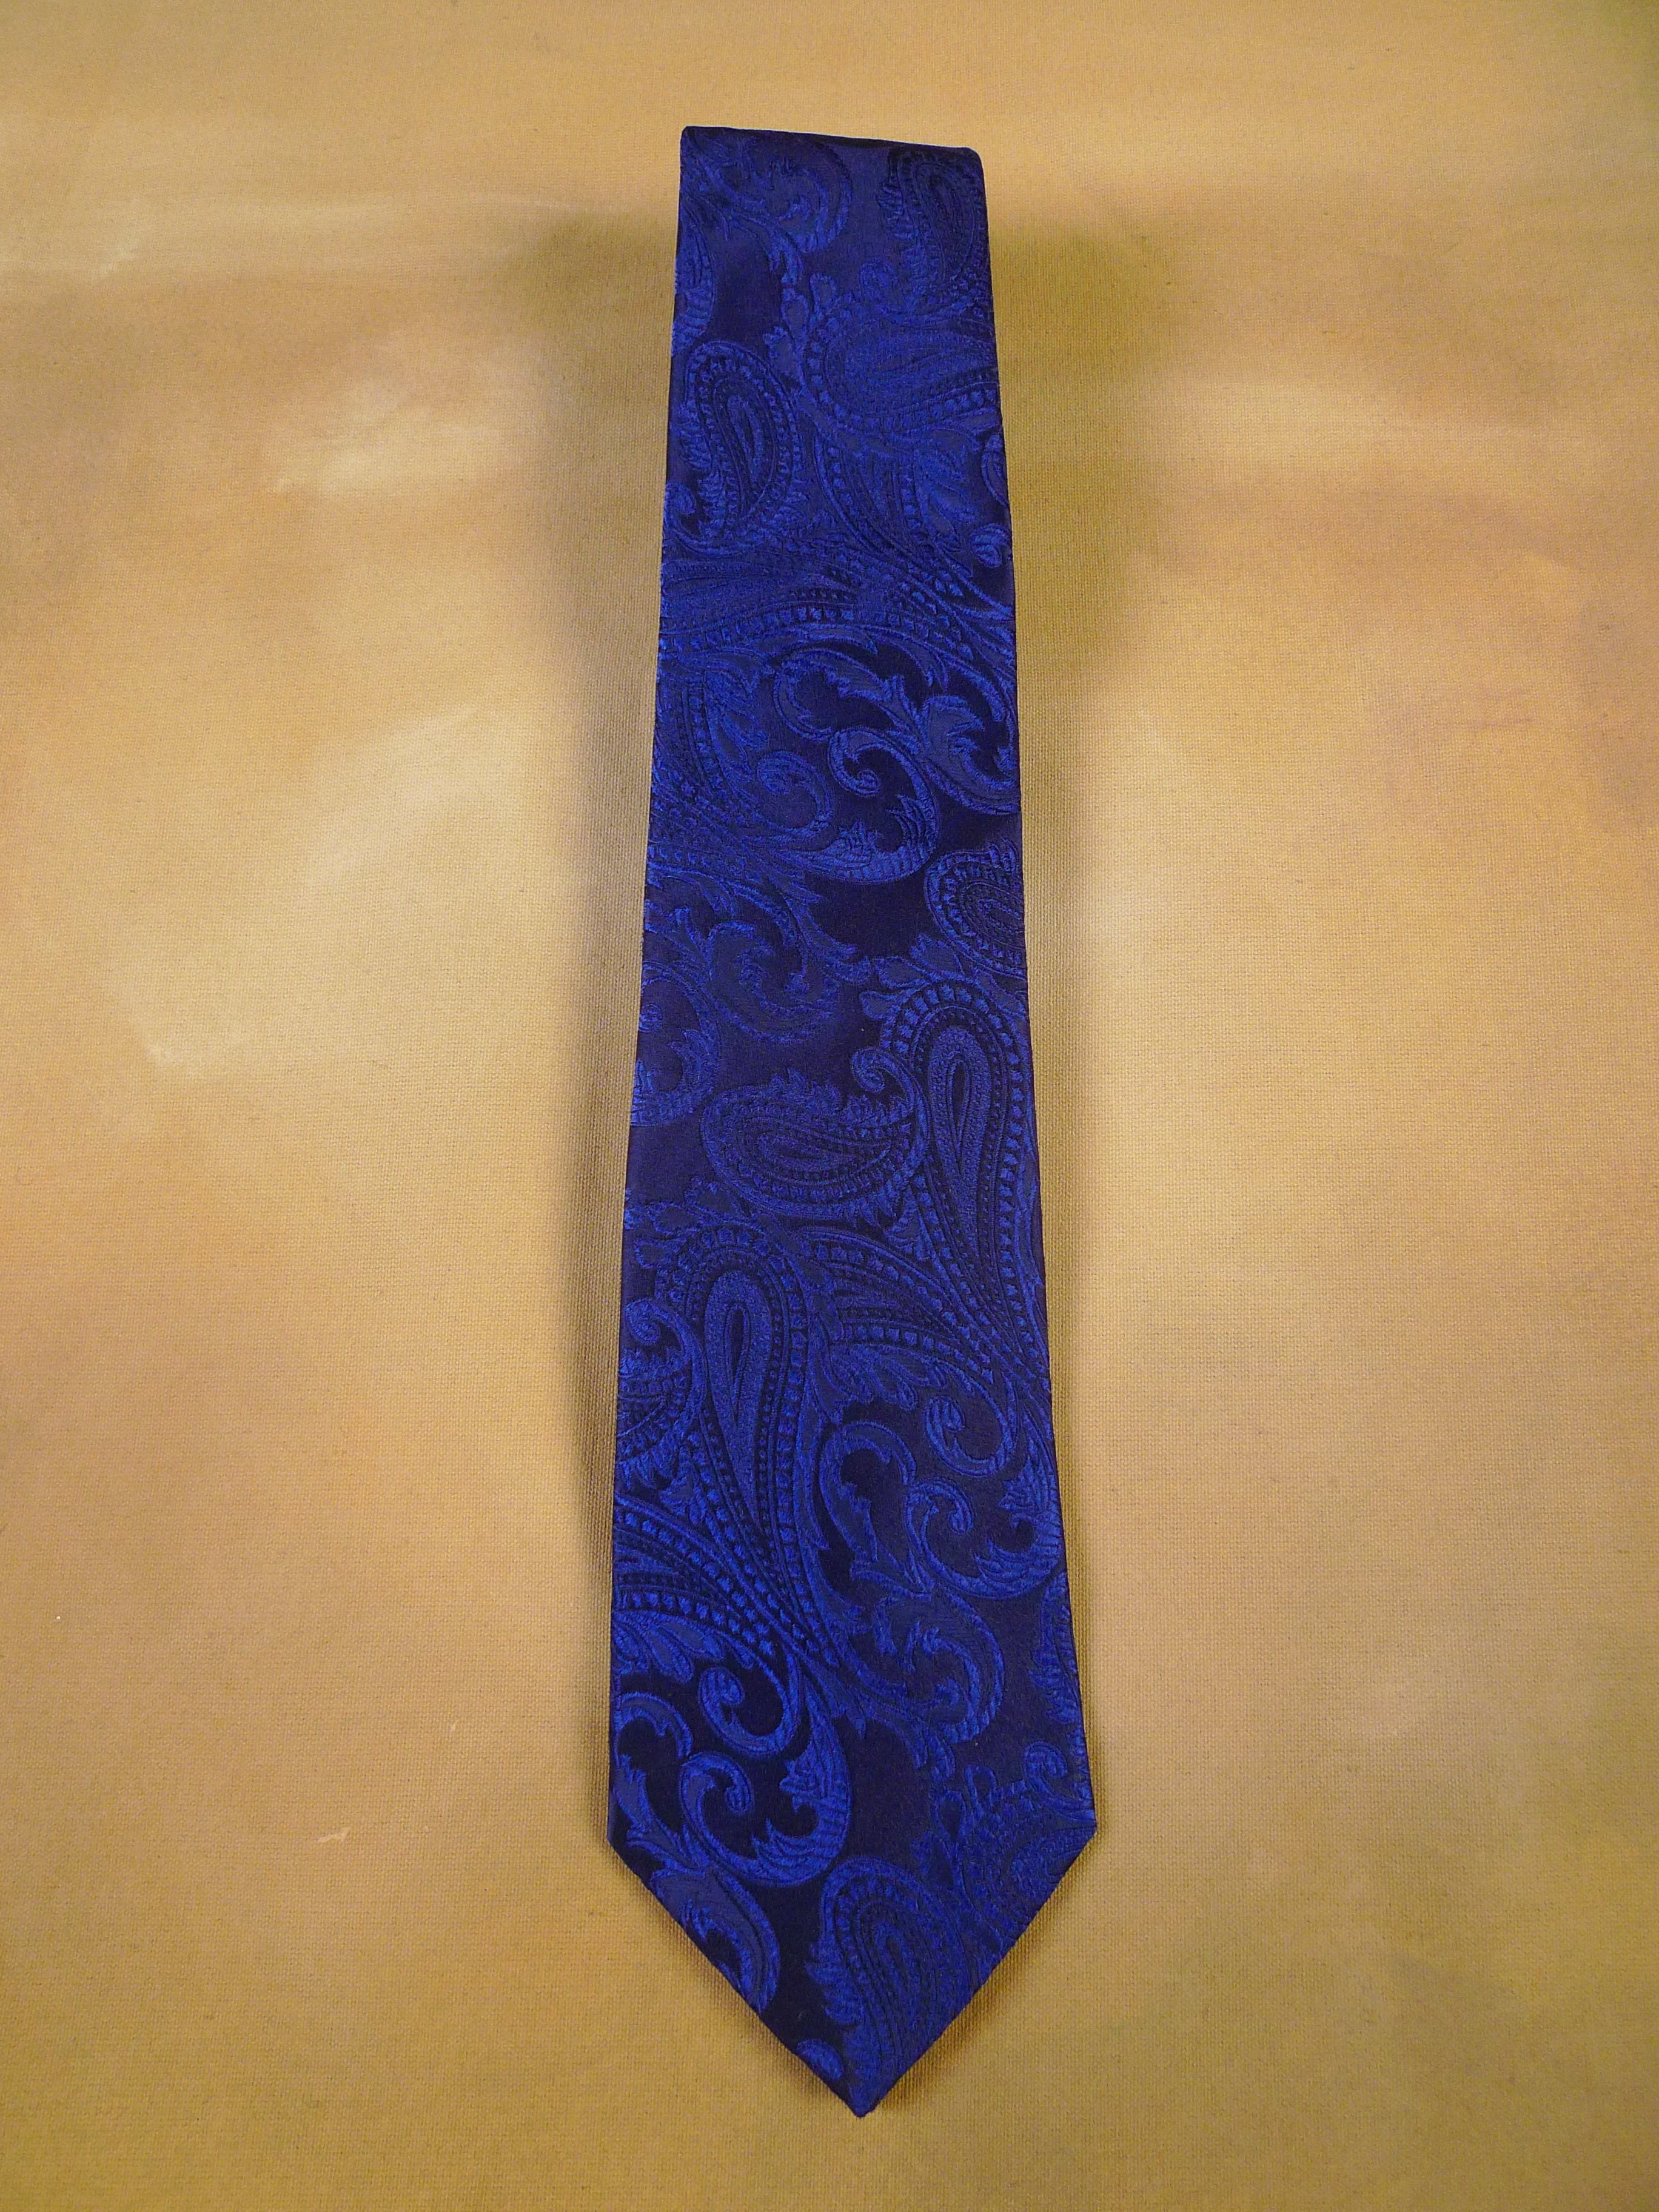 24/0084 brand new turnbull & asser navy blue embroidered paisley silk tie